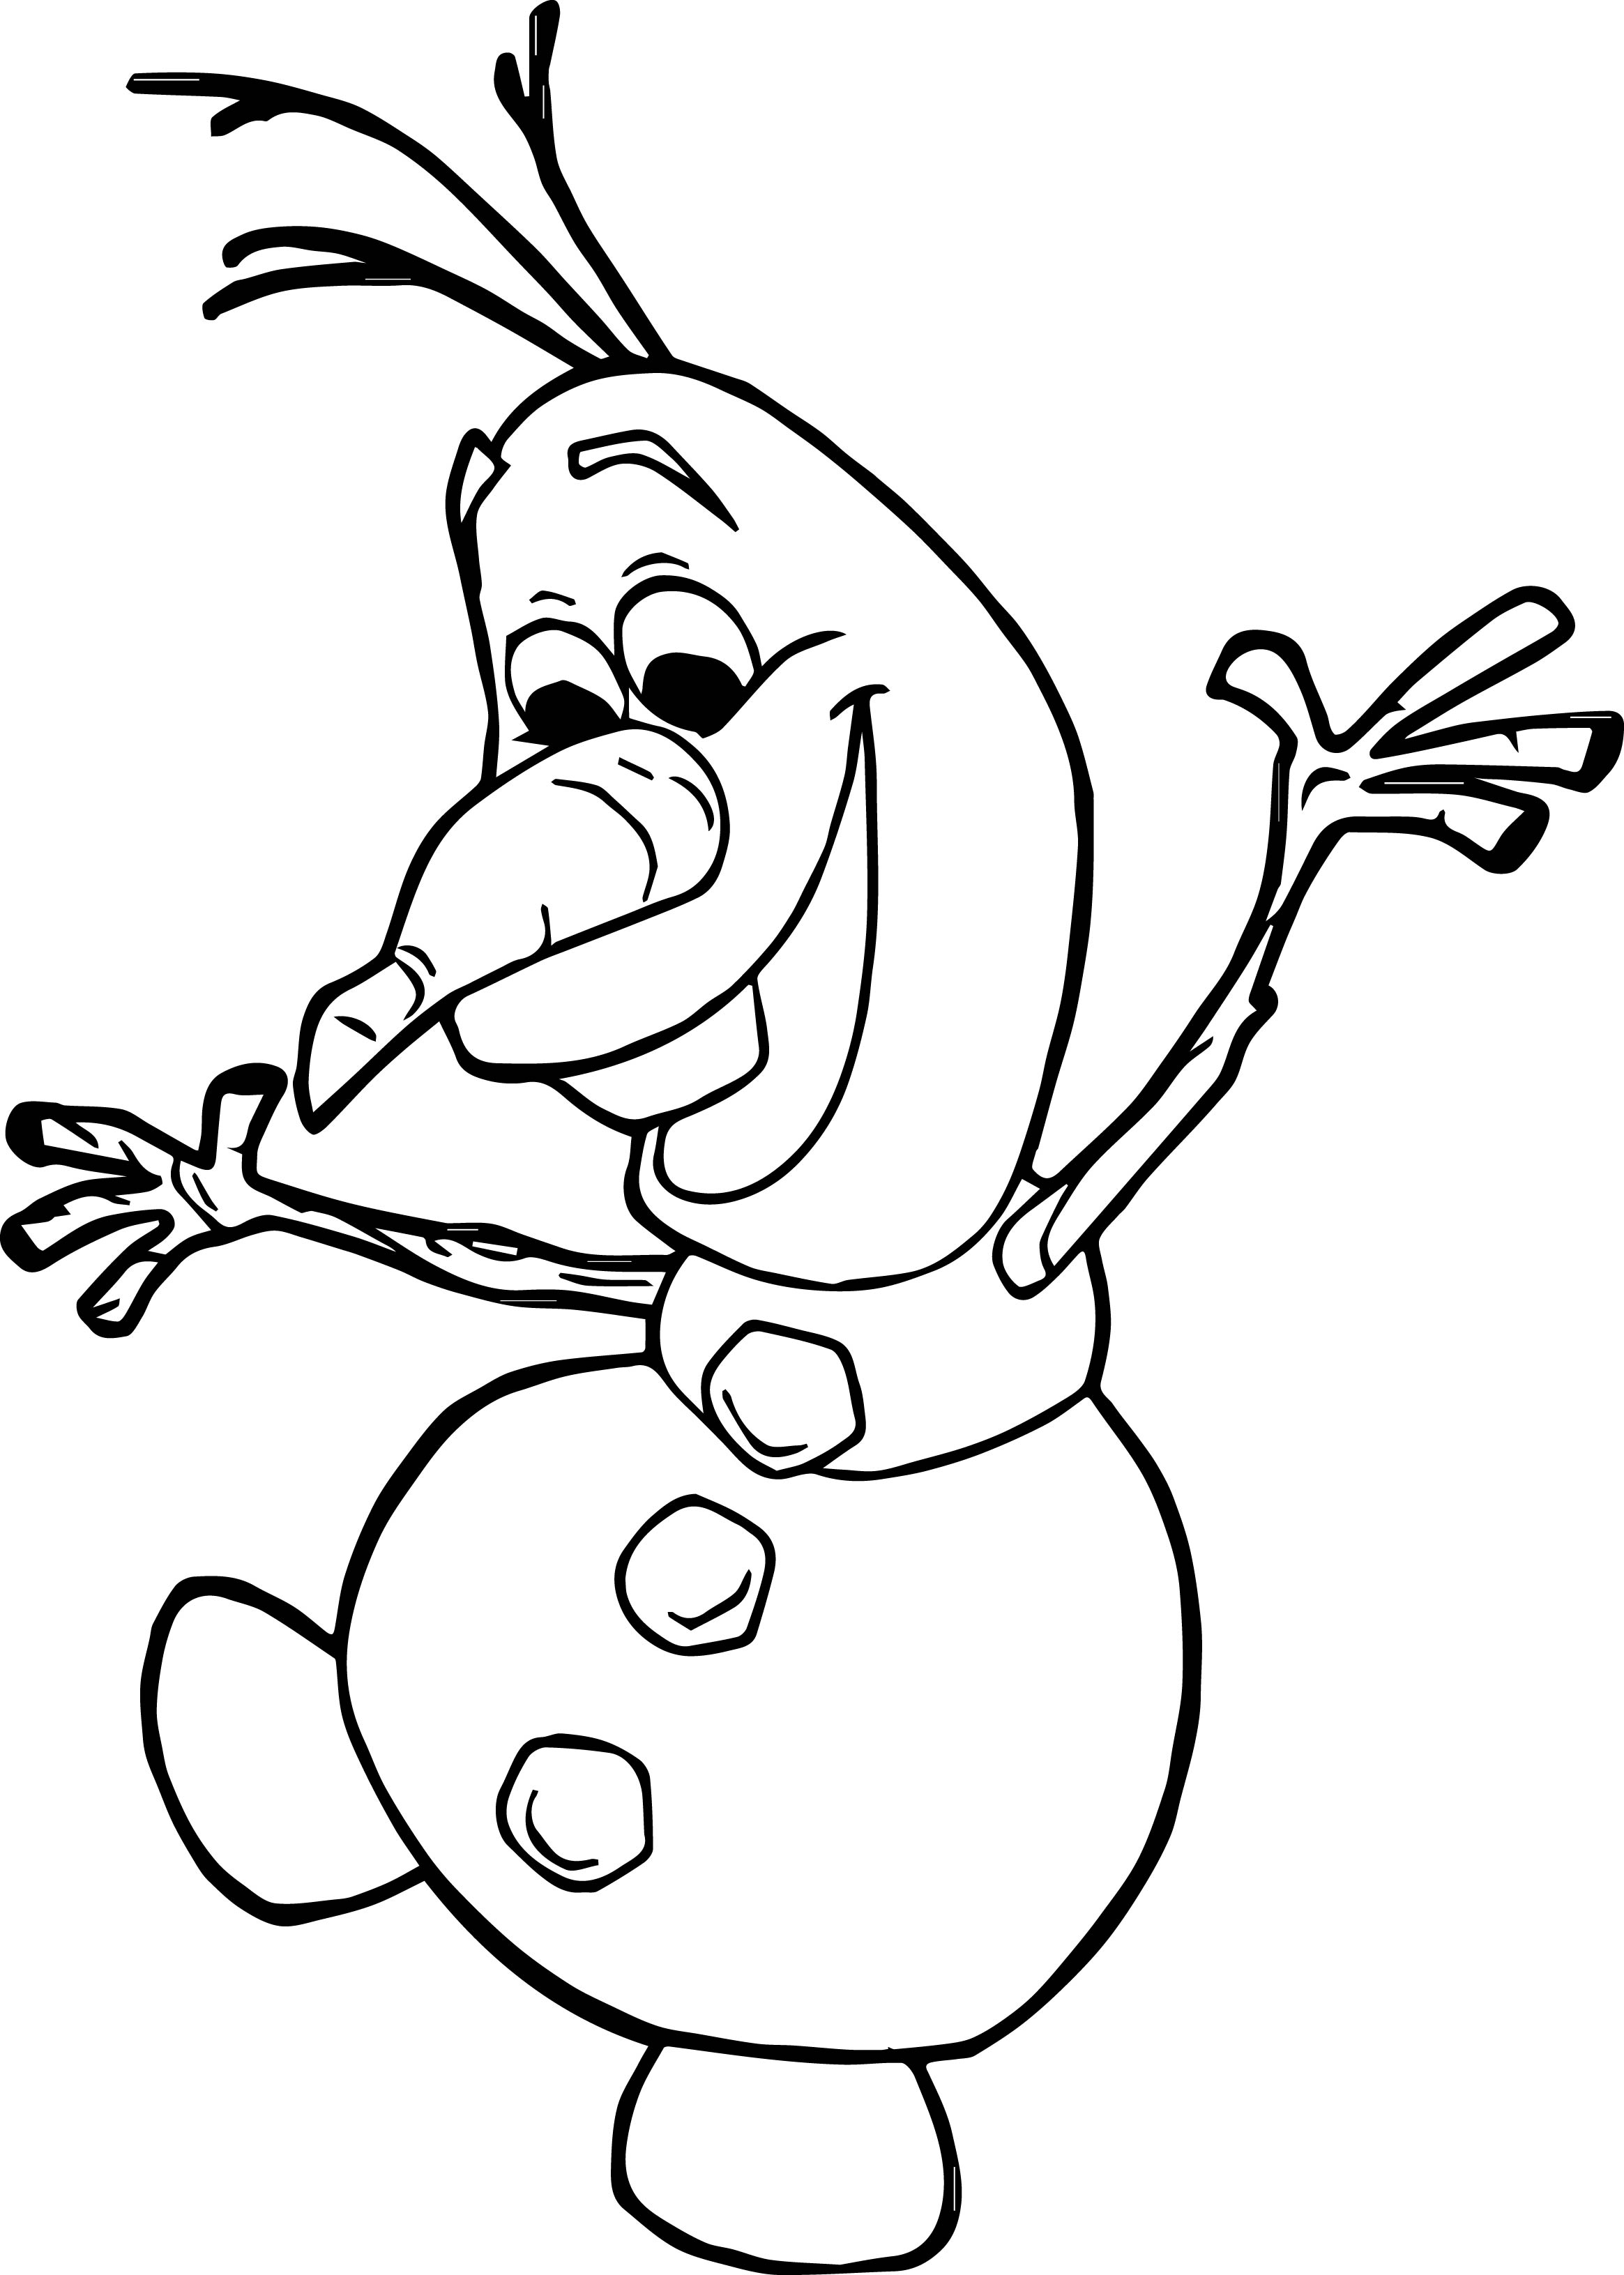 olaf coloring page frozens olaf coloring pages best coloring pages for kids page olaf coloring 1 2